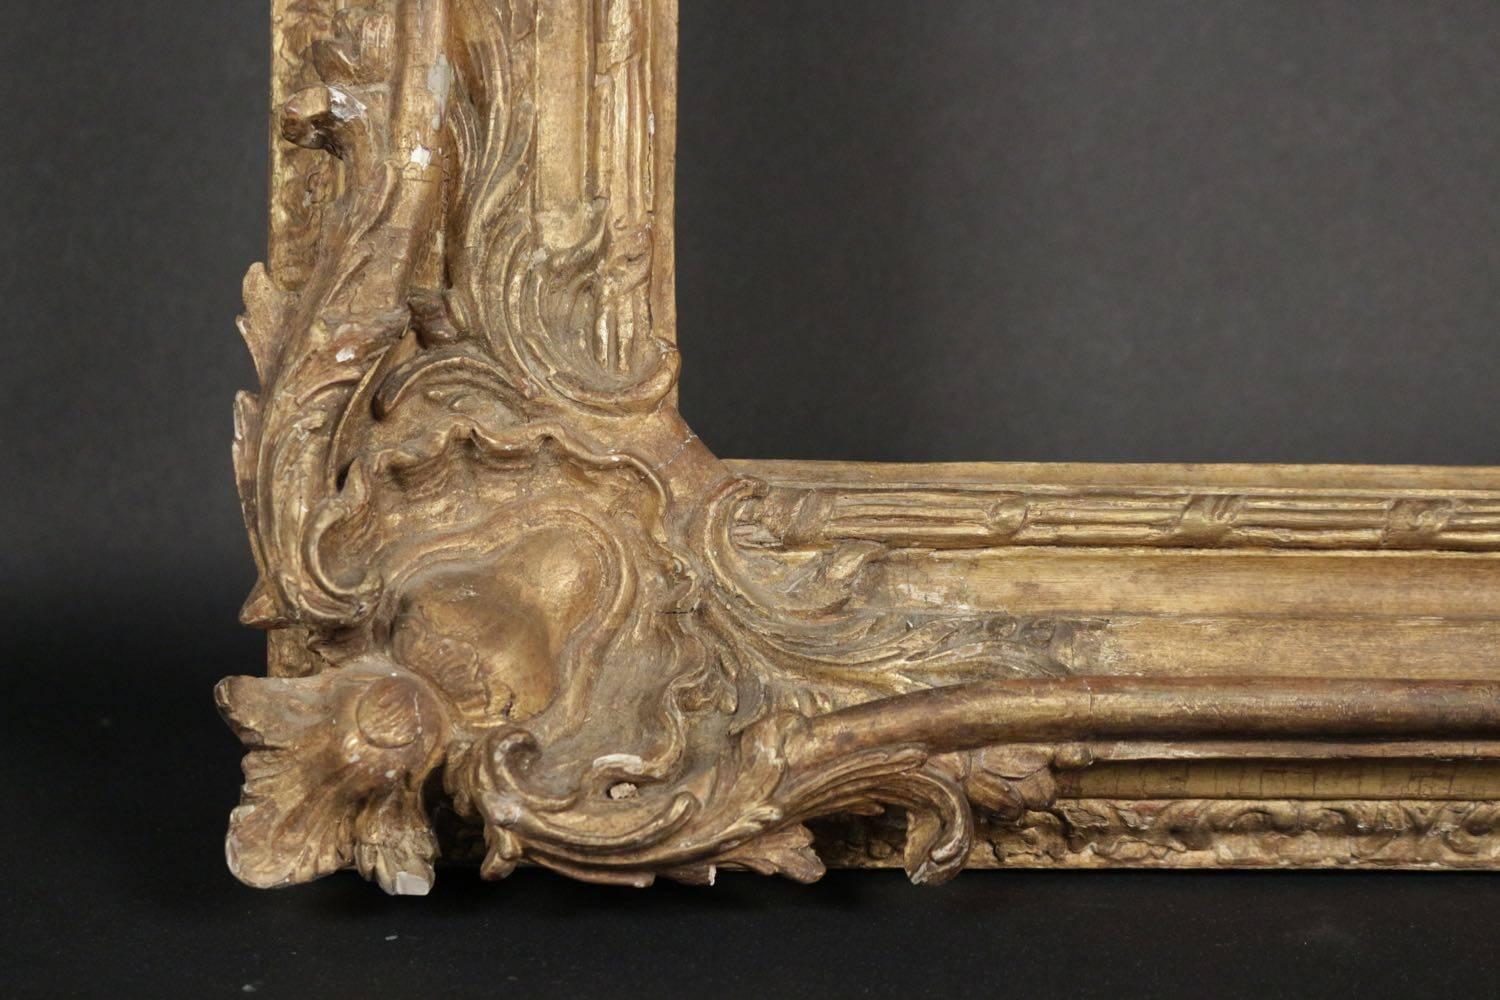 Exceptional Louis XV period royal frame mounted as mirror, 18th century
carved giltwood, with royal 